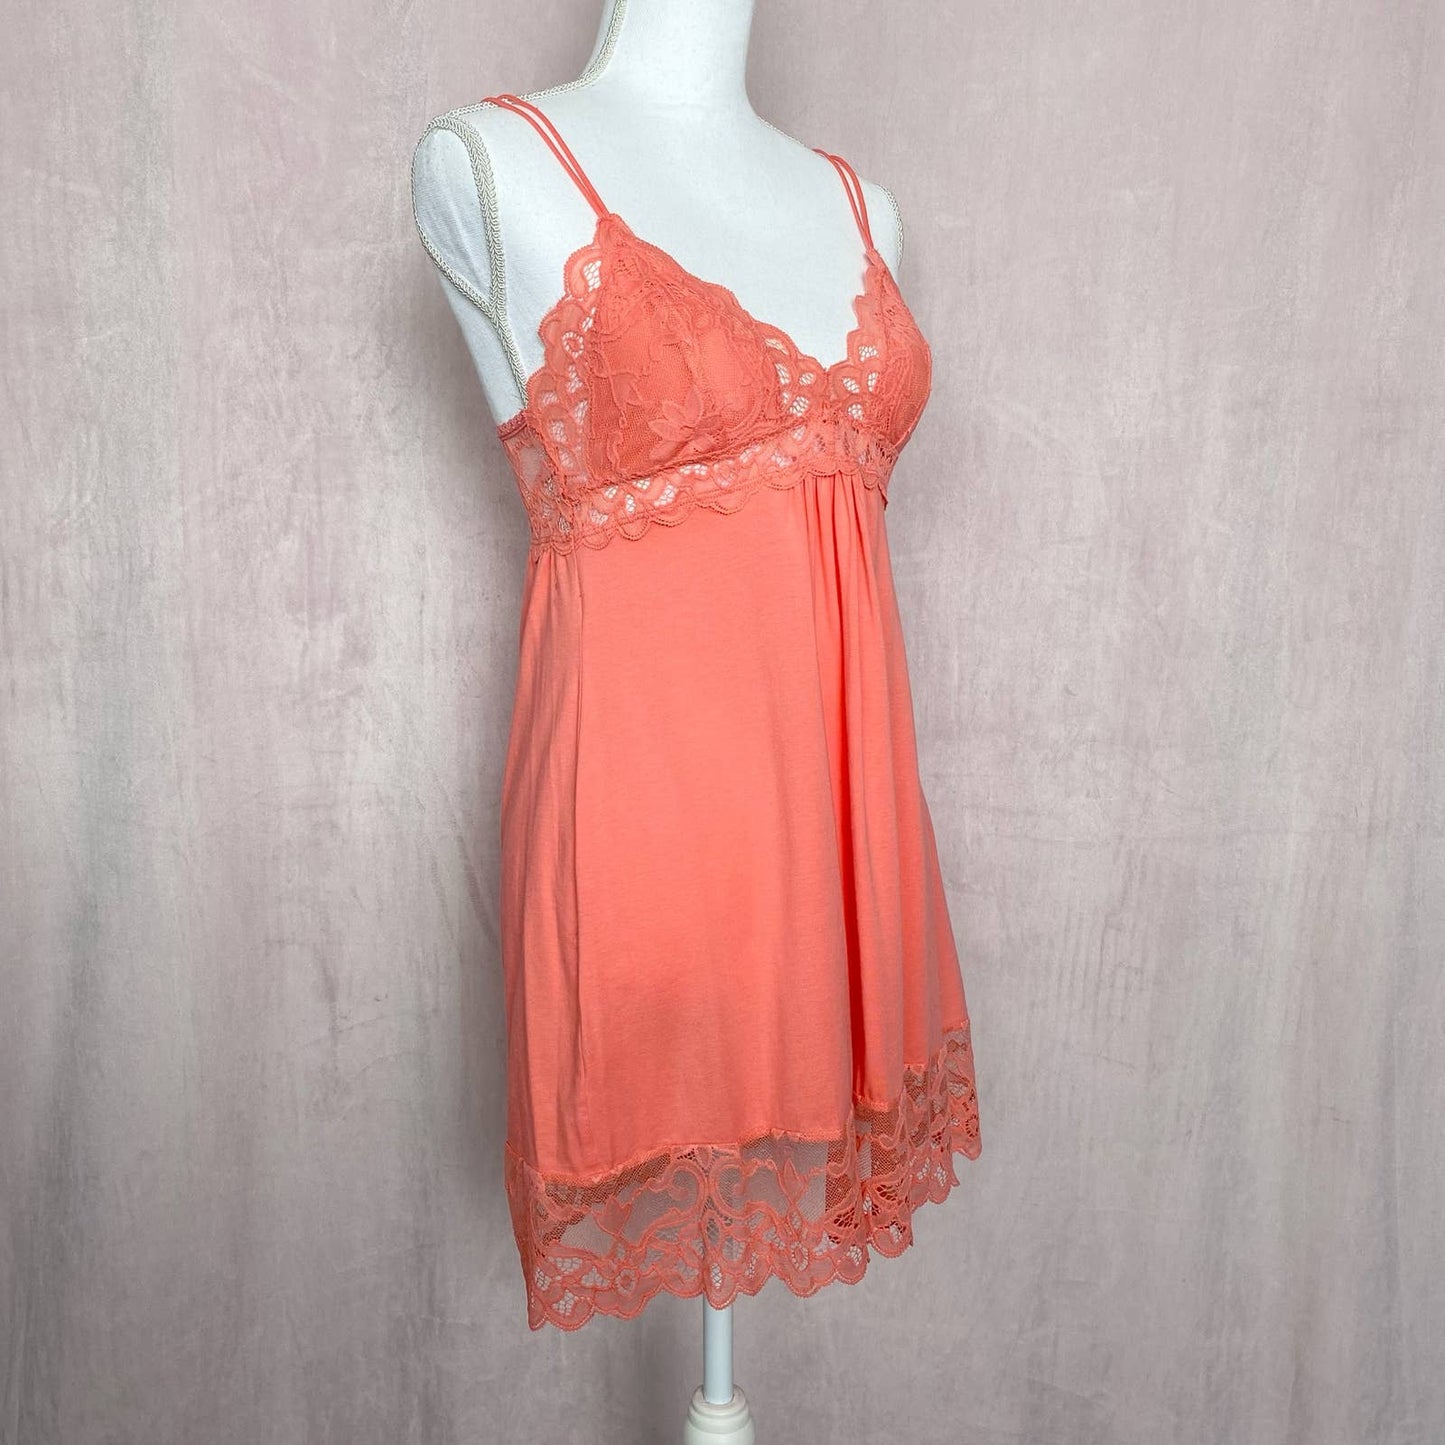 Secondhand In Bloom by Jonquil Lace Chemise Mini Dress, Size S/M